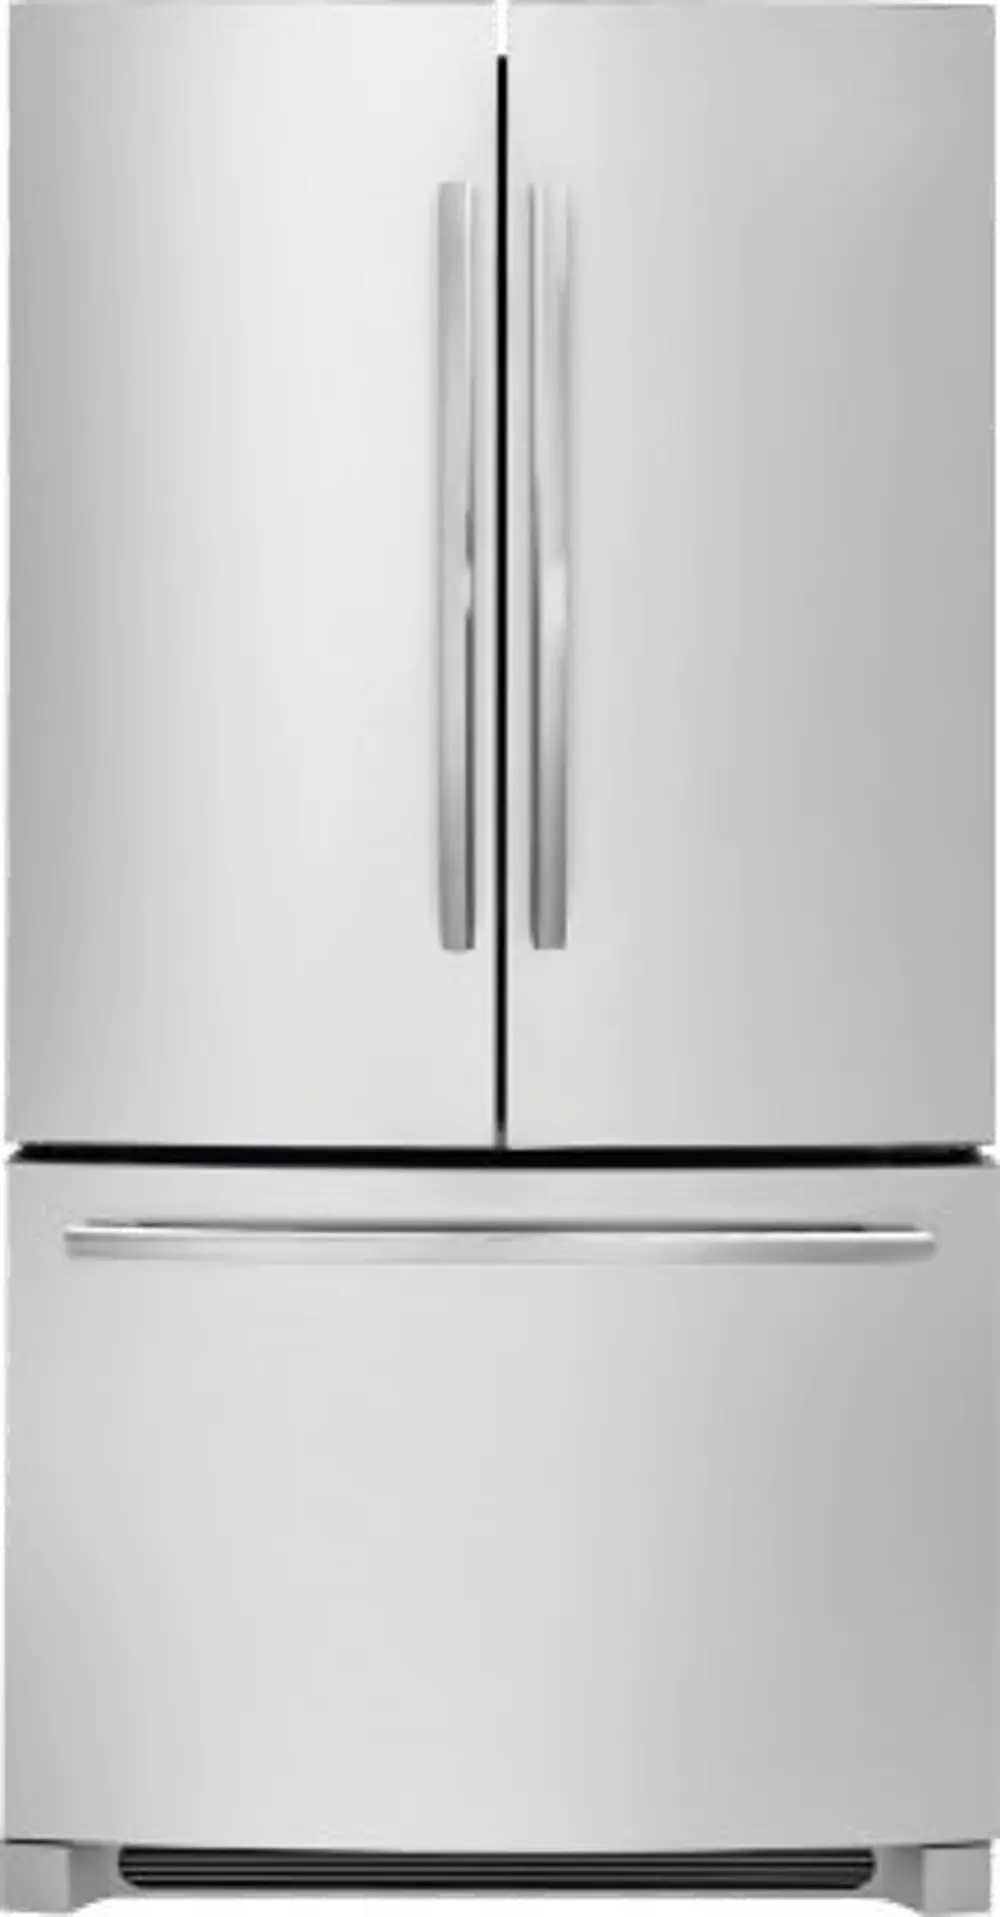 FDBG2250SS Frigidaire French Door Refrigerator - 36 inch Stainless Steel-1